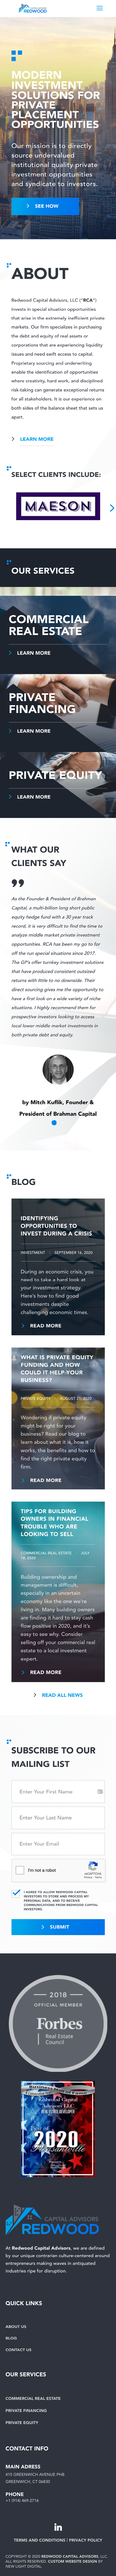 Redwood Capital Advisors Website Home Page Mobile Version